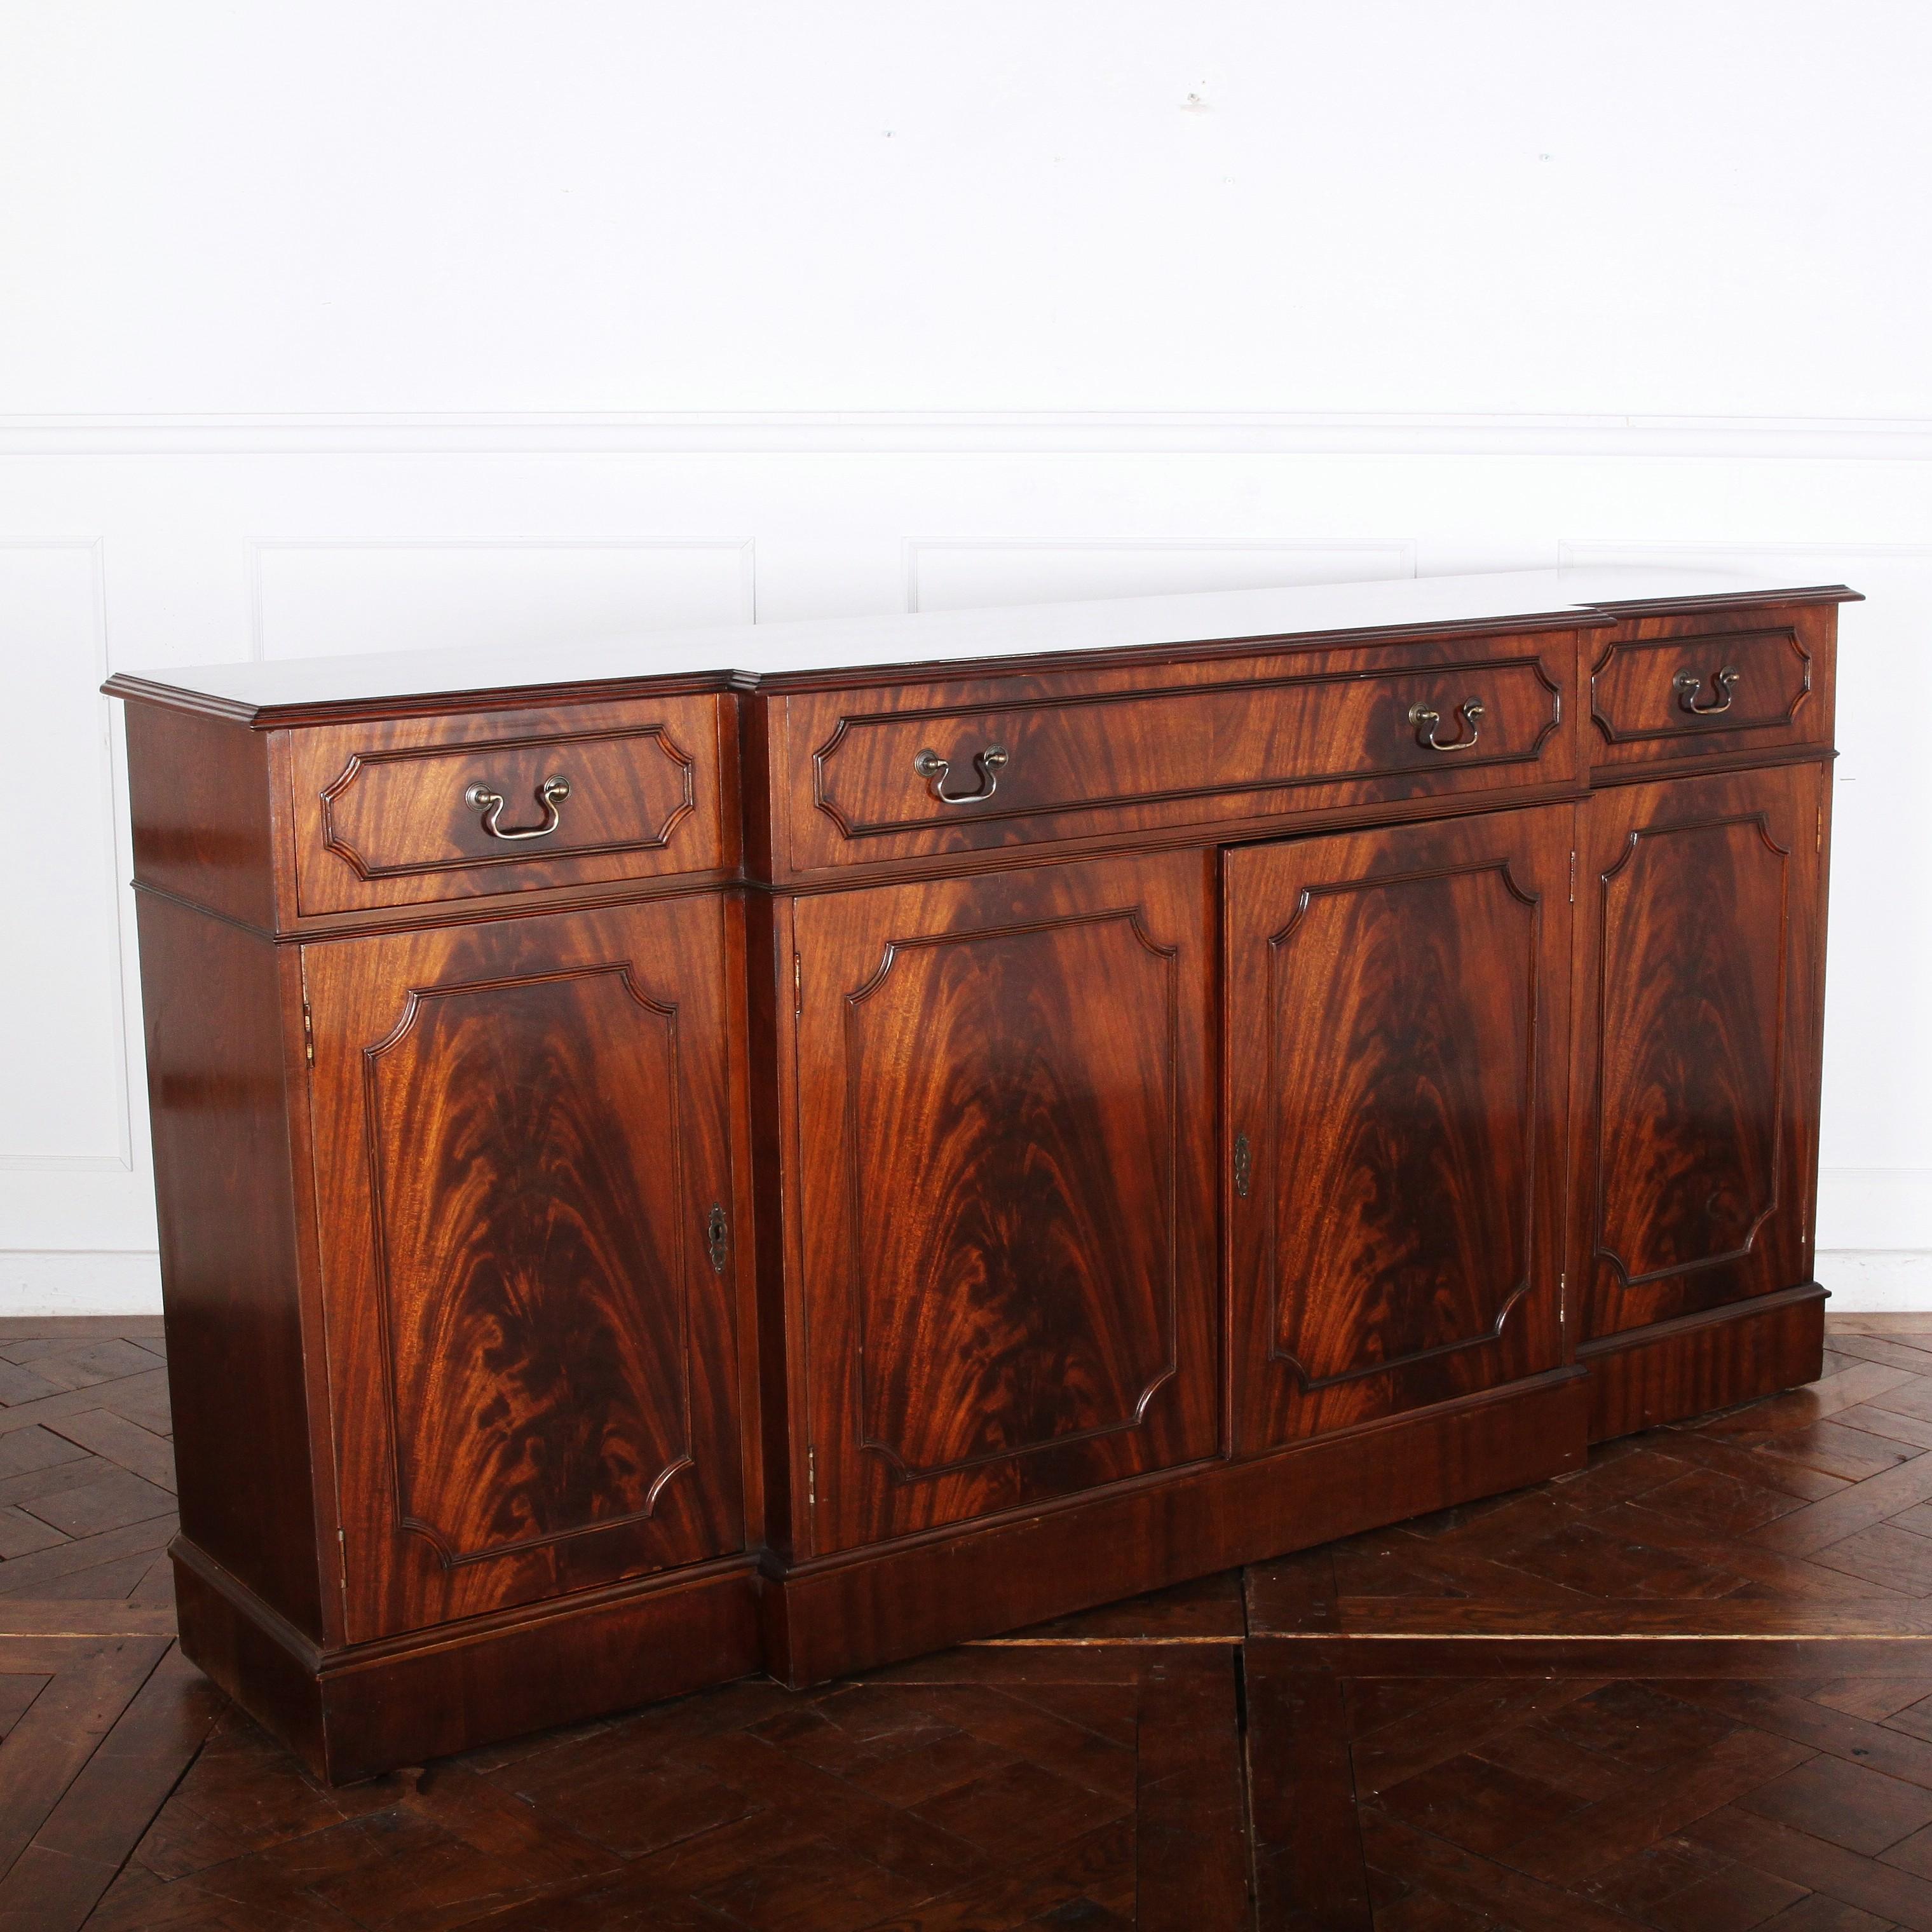 An English break front mahogany side cabinet, the four doors with moulded details and flame mahogany fronts and with three upper drawers. Adjustable shelves in the lower cabinets. The relatively shallow depth makes this a useful storage option in